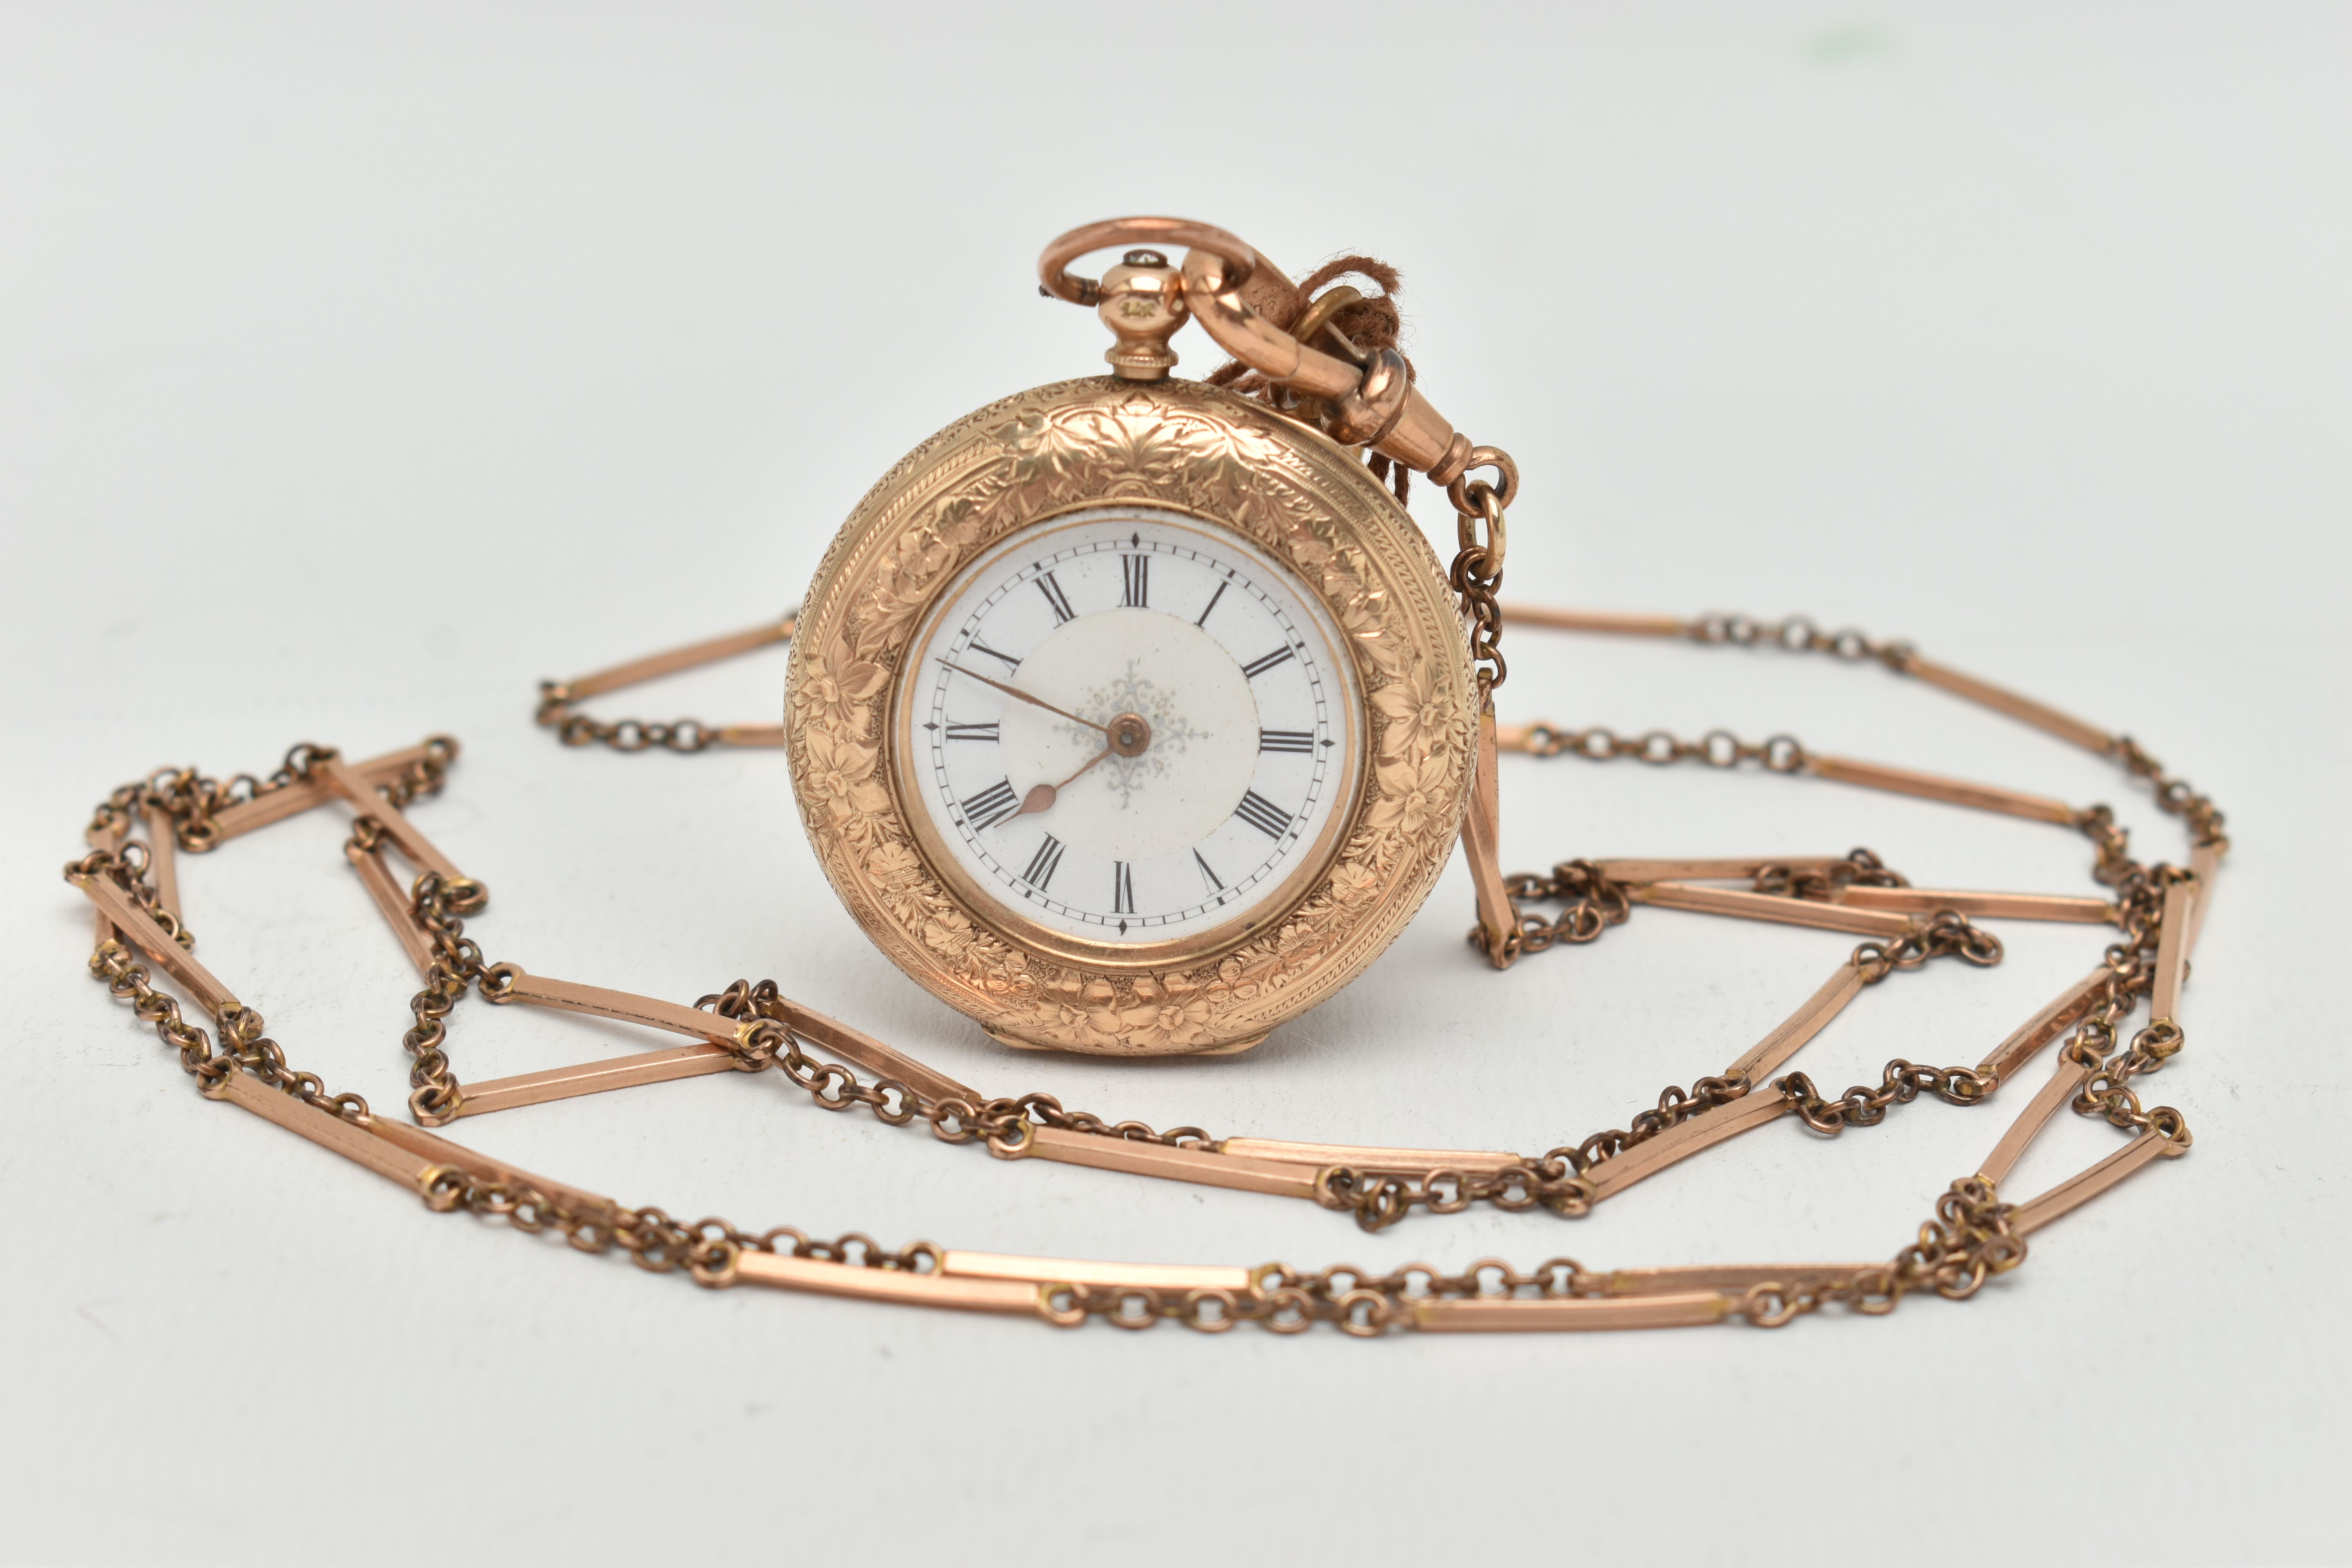 A YELLOW METAL POCKET WATCH AND LONGUARD CHAIN, key wound half hunter pocket watch, floral and